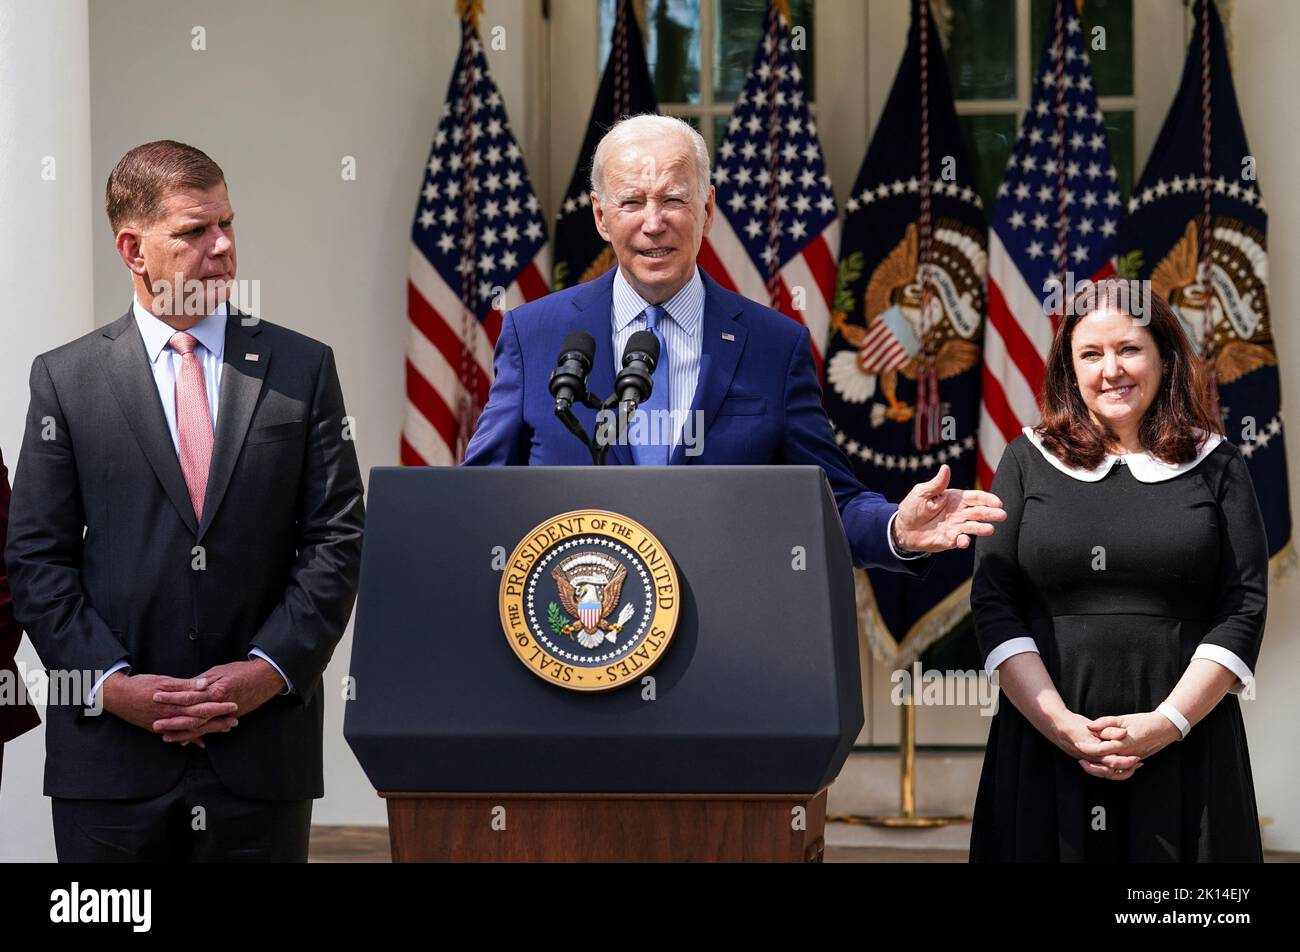 U.S. President Joe Biden is flanked by  Labor Secretary Marty Walsh and Celeste Drake, as Biden delivers remarks after U.S. railroads and unions secured a tentative deal to avert a rail shutdown, in the Rose Garden at the White House in Washington, U.S., September 15, 2022. REUTERS/Kevin Lamarque Stock Photo